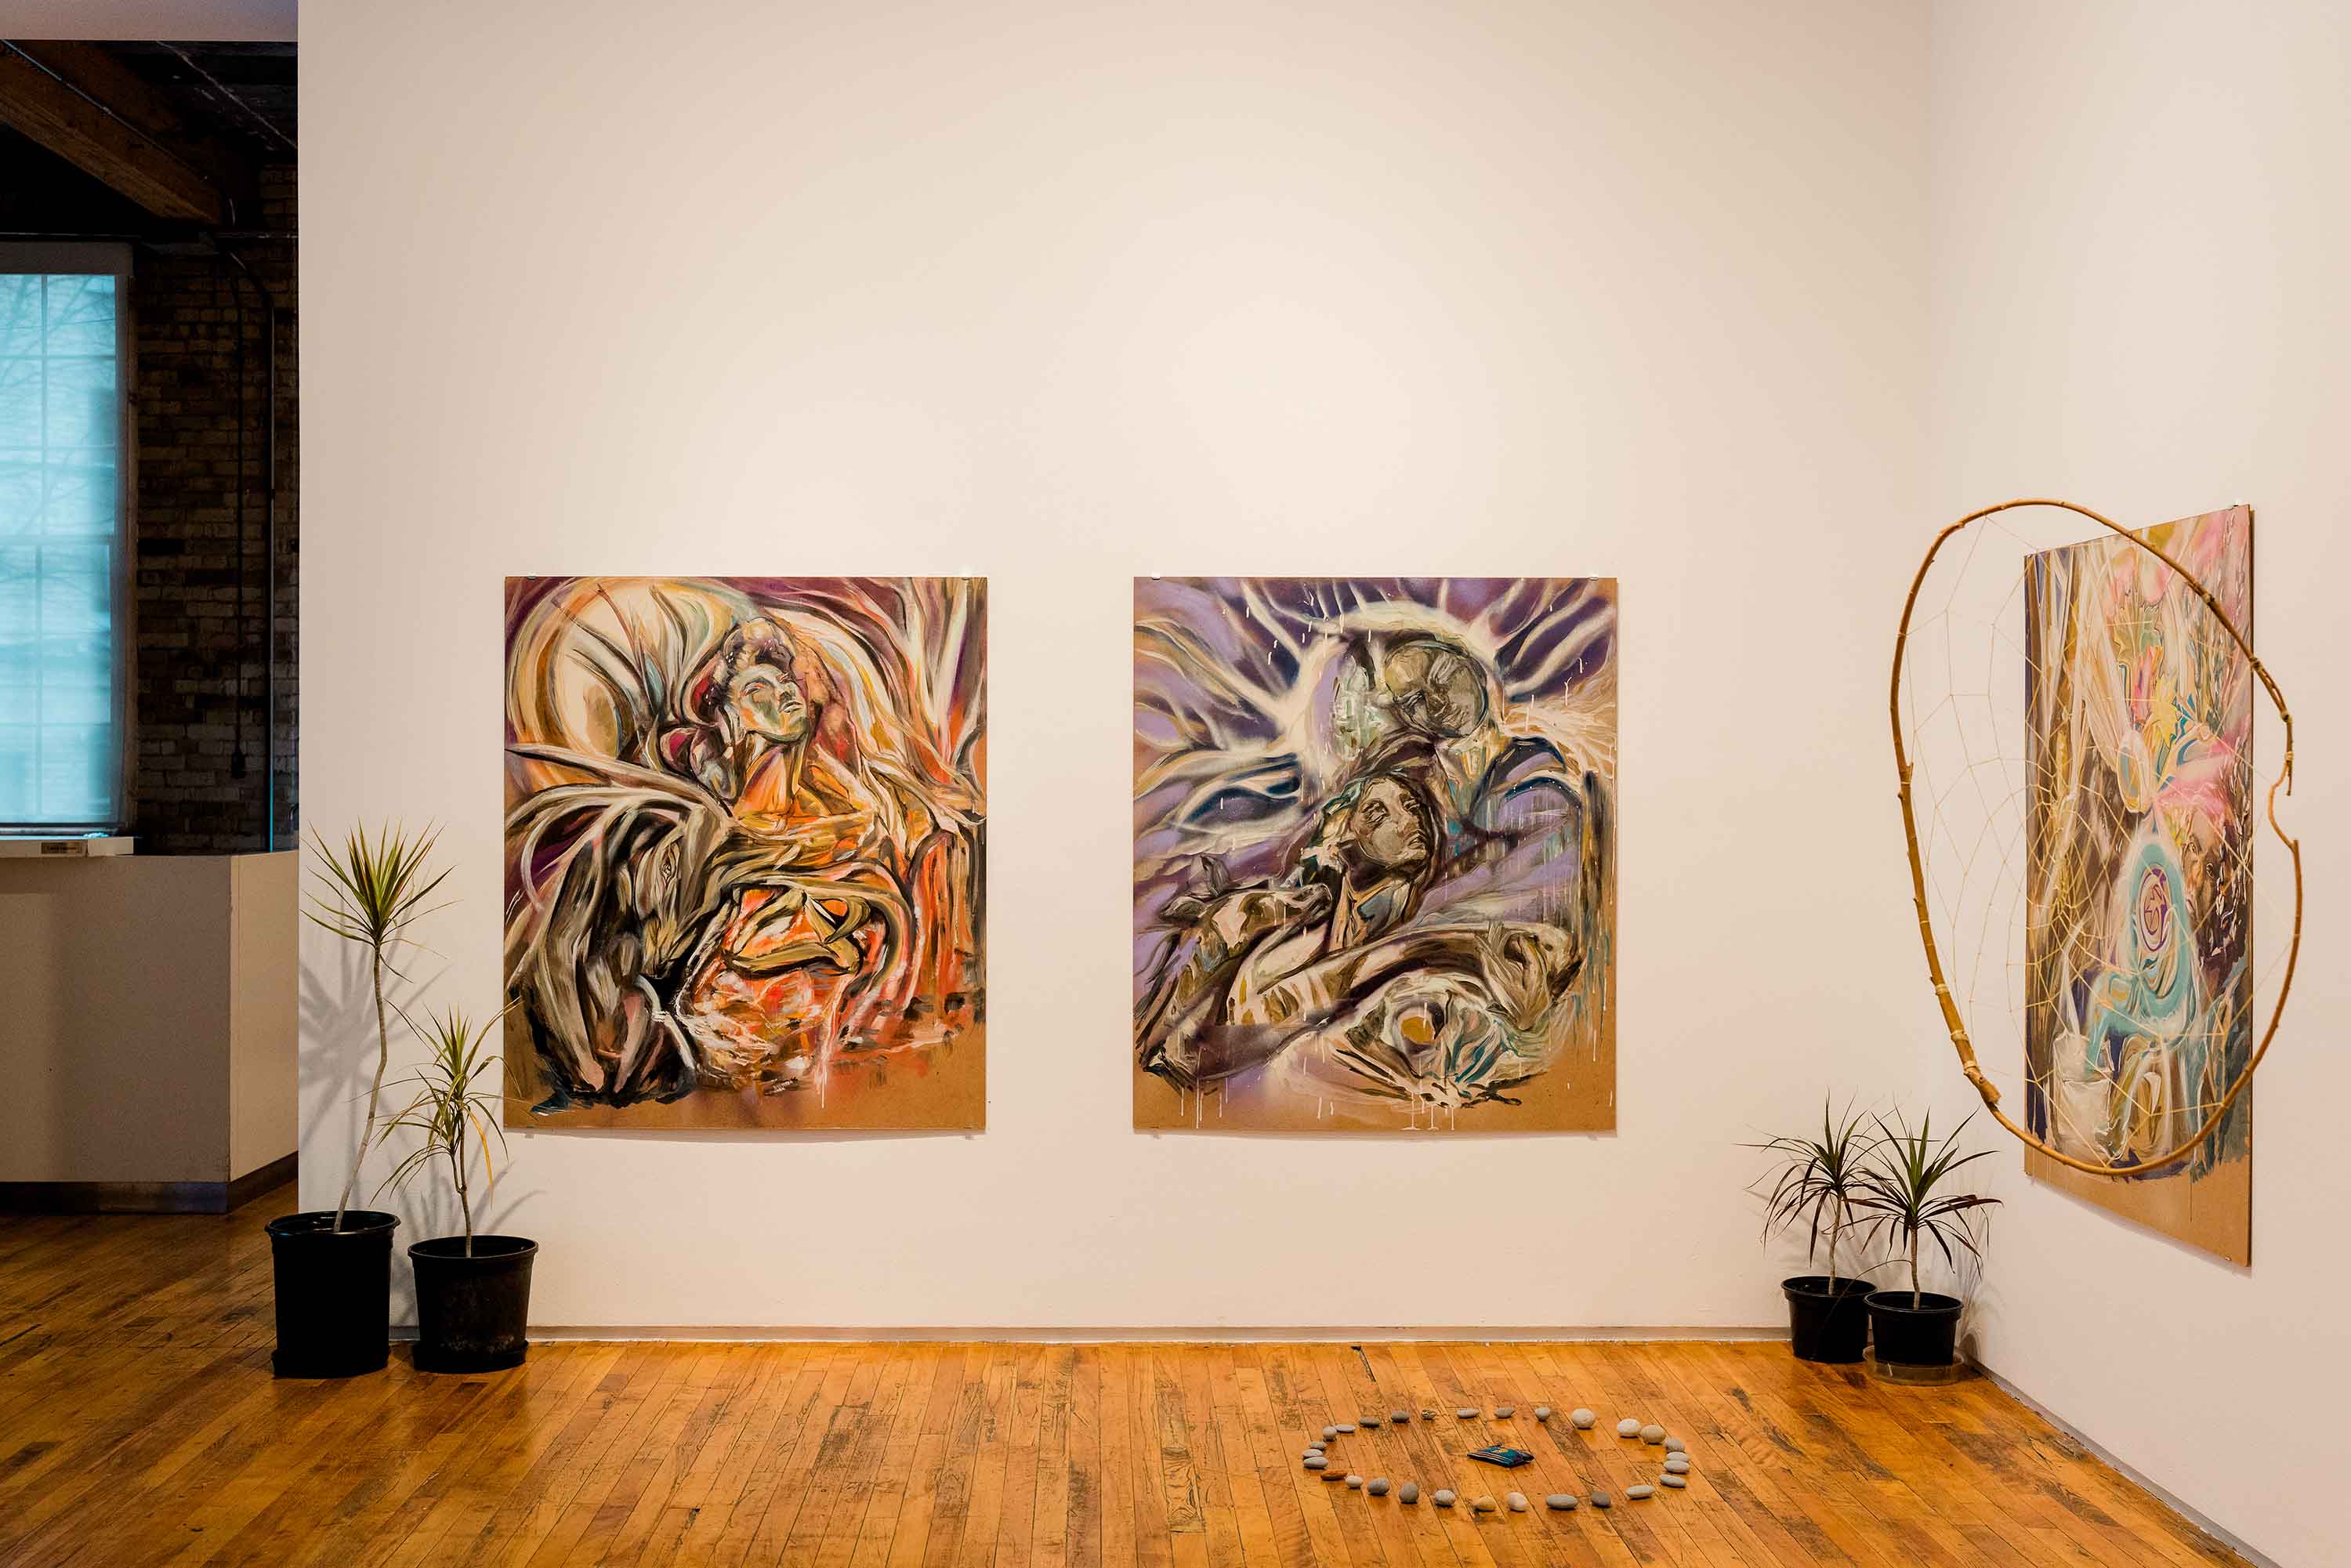 A gallery space featuring paintings, a large dream catcher, live plants, and a stone circle.